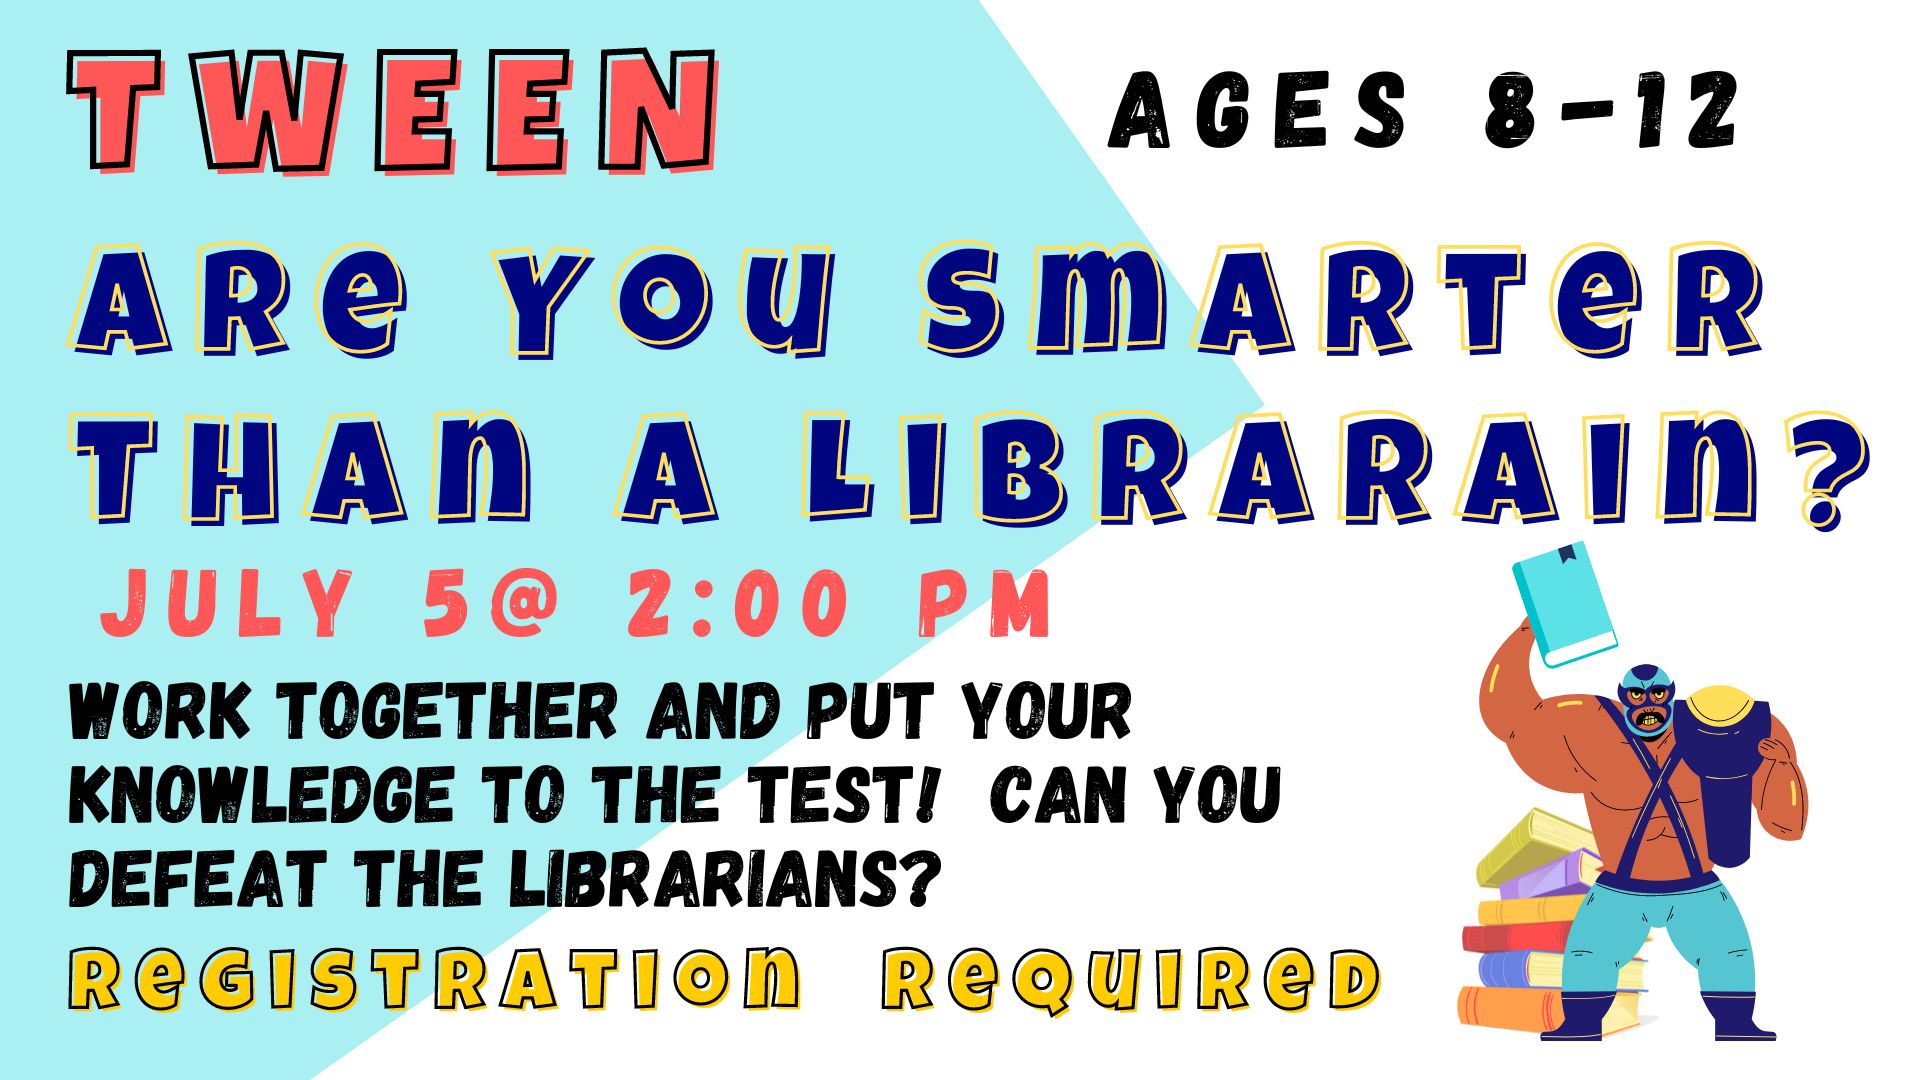 Graphic of a Luchador holding a wrestling belt and a book while standing in front of a pile of books.   Text reads:  Tween Are You Smarter than a Librarian?  Ages 8-12.  July  5 at 2:00 pm.  Work together and put your knowledge to the test! Can you defeat the Librarians?  Registration required.